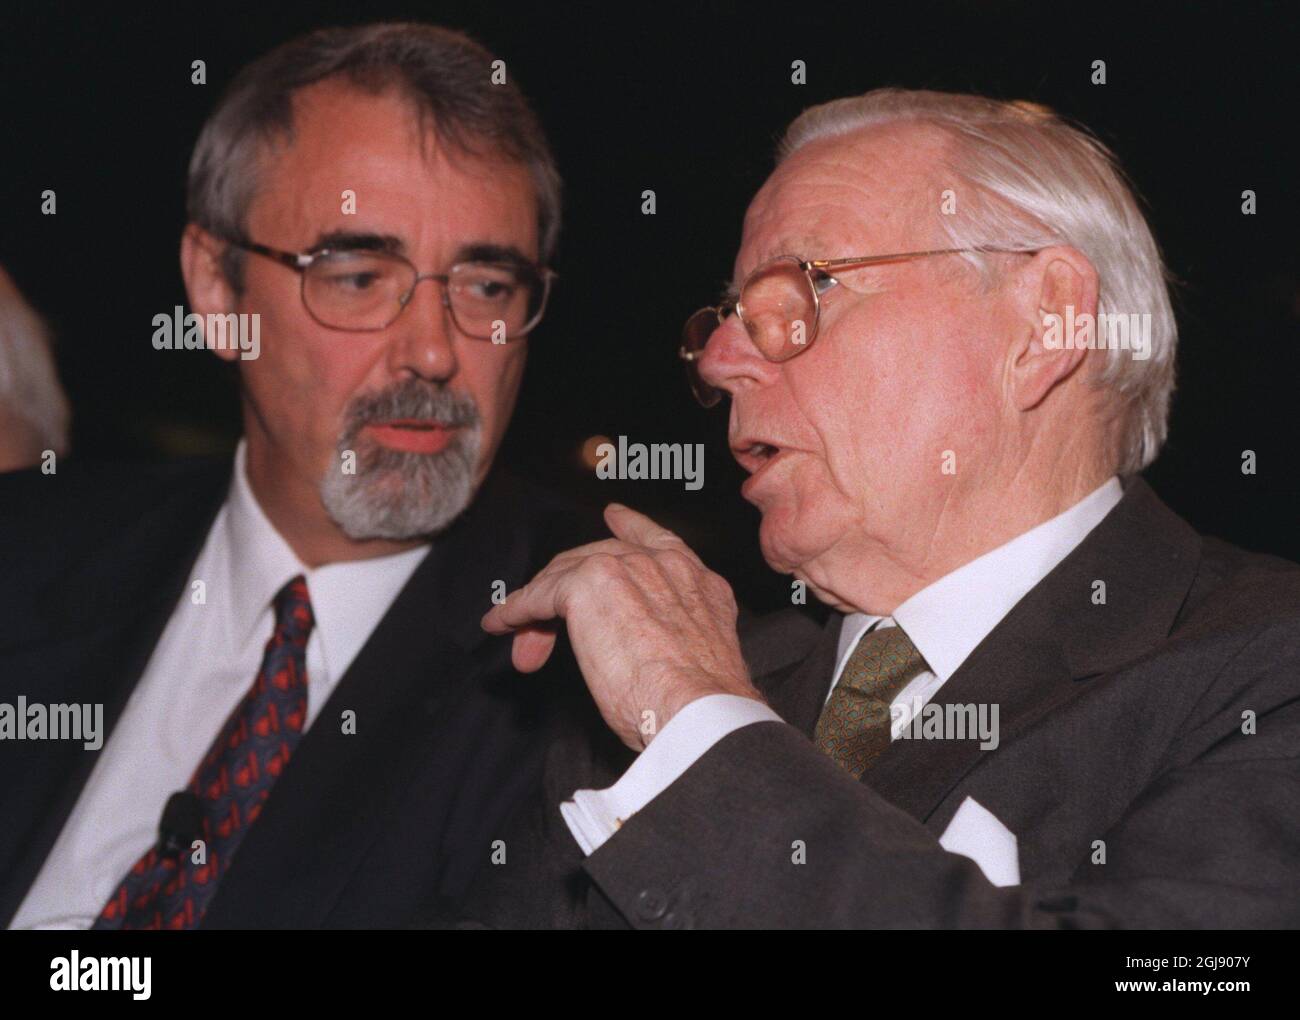 Â© SCANPIX, Stockholm, Sweden, 19990414, Foto: Rolf Hoeer/SCANPIX Code: 40050 *** File *** The owners of the ABB Company is demanding that the pension of their former President and CEO Swede Percy Barnevik is whitdrawn. The new board and owners concider his miljon dollar parachute too high and that the old board did not properly inform of the negotiations. Picture; Percy Barnevik (left) and Peter Wallenberg from the Swedish financefamily Wallenbergs, also owners of the ABB  Stock Photo